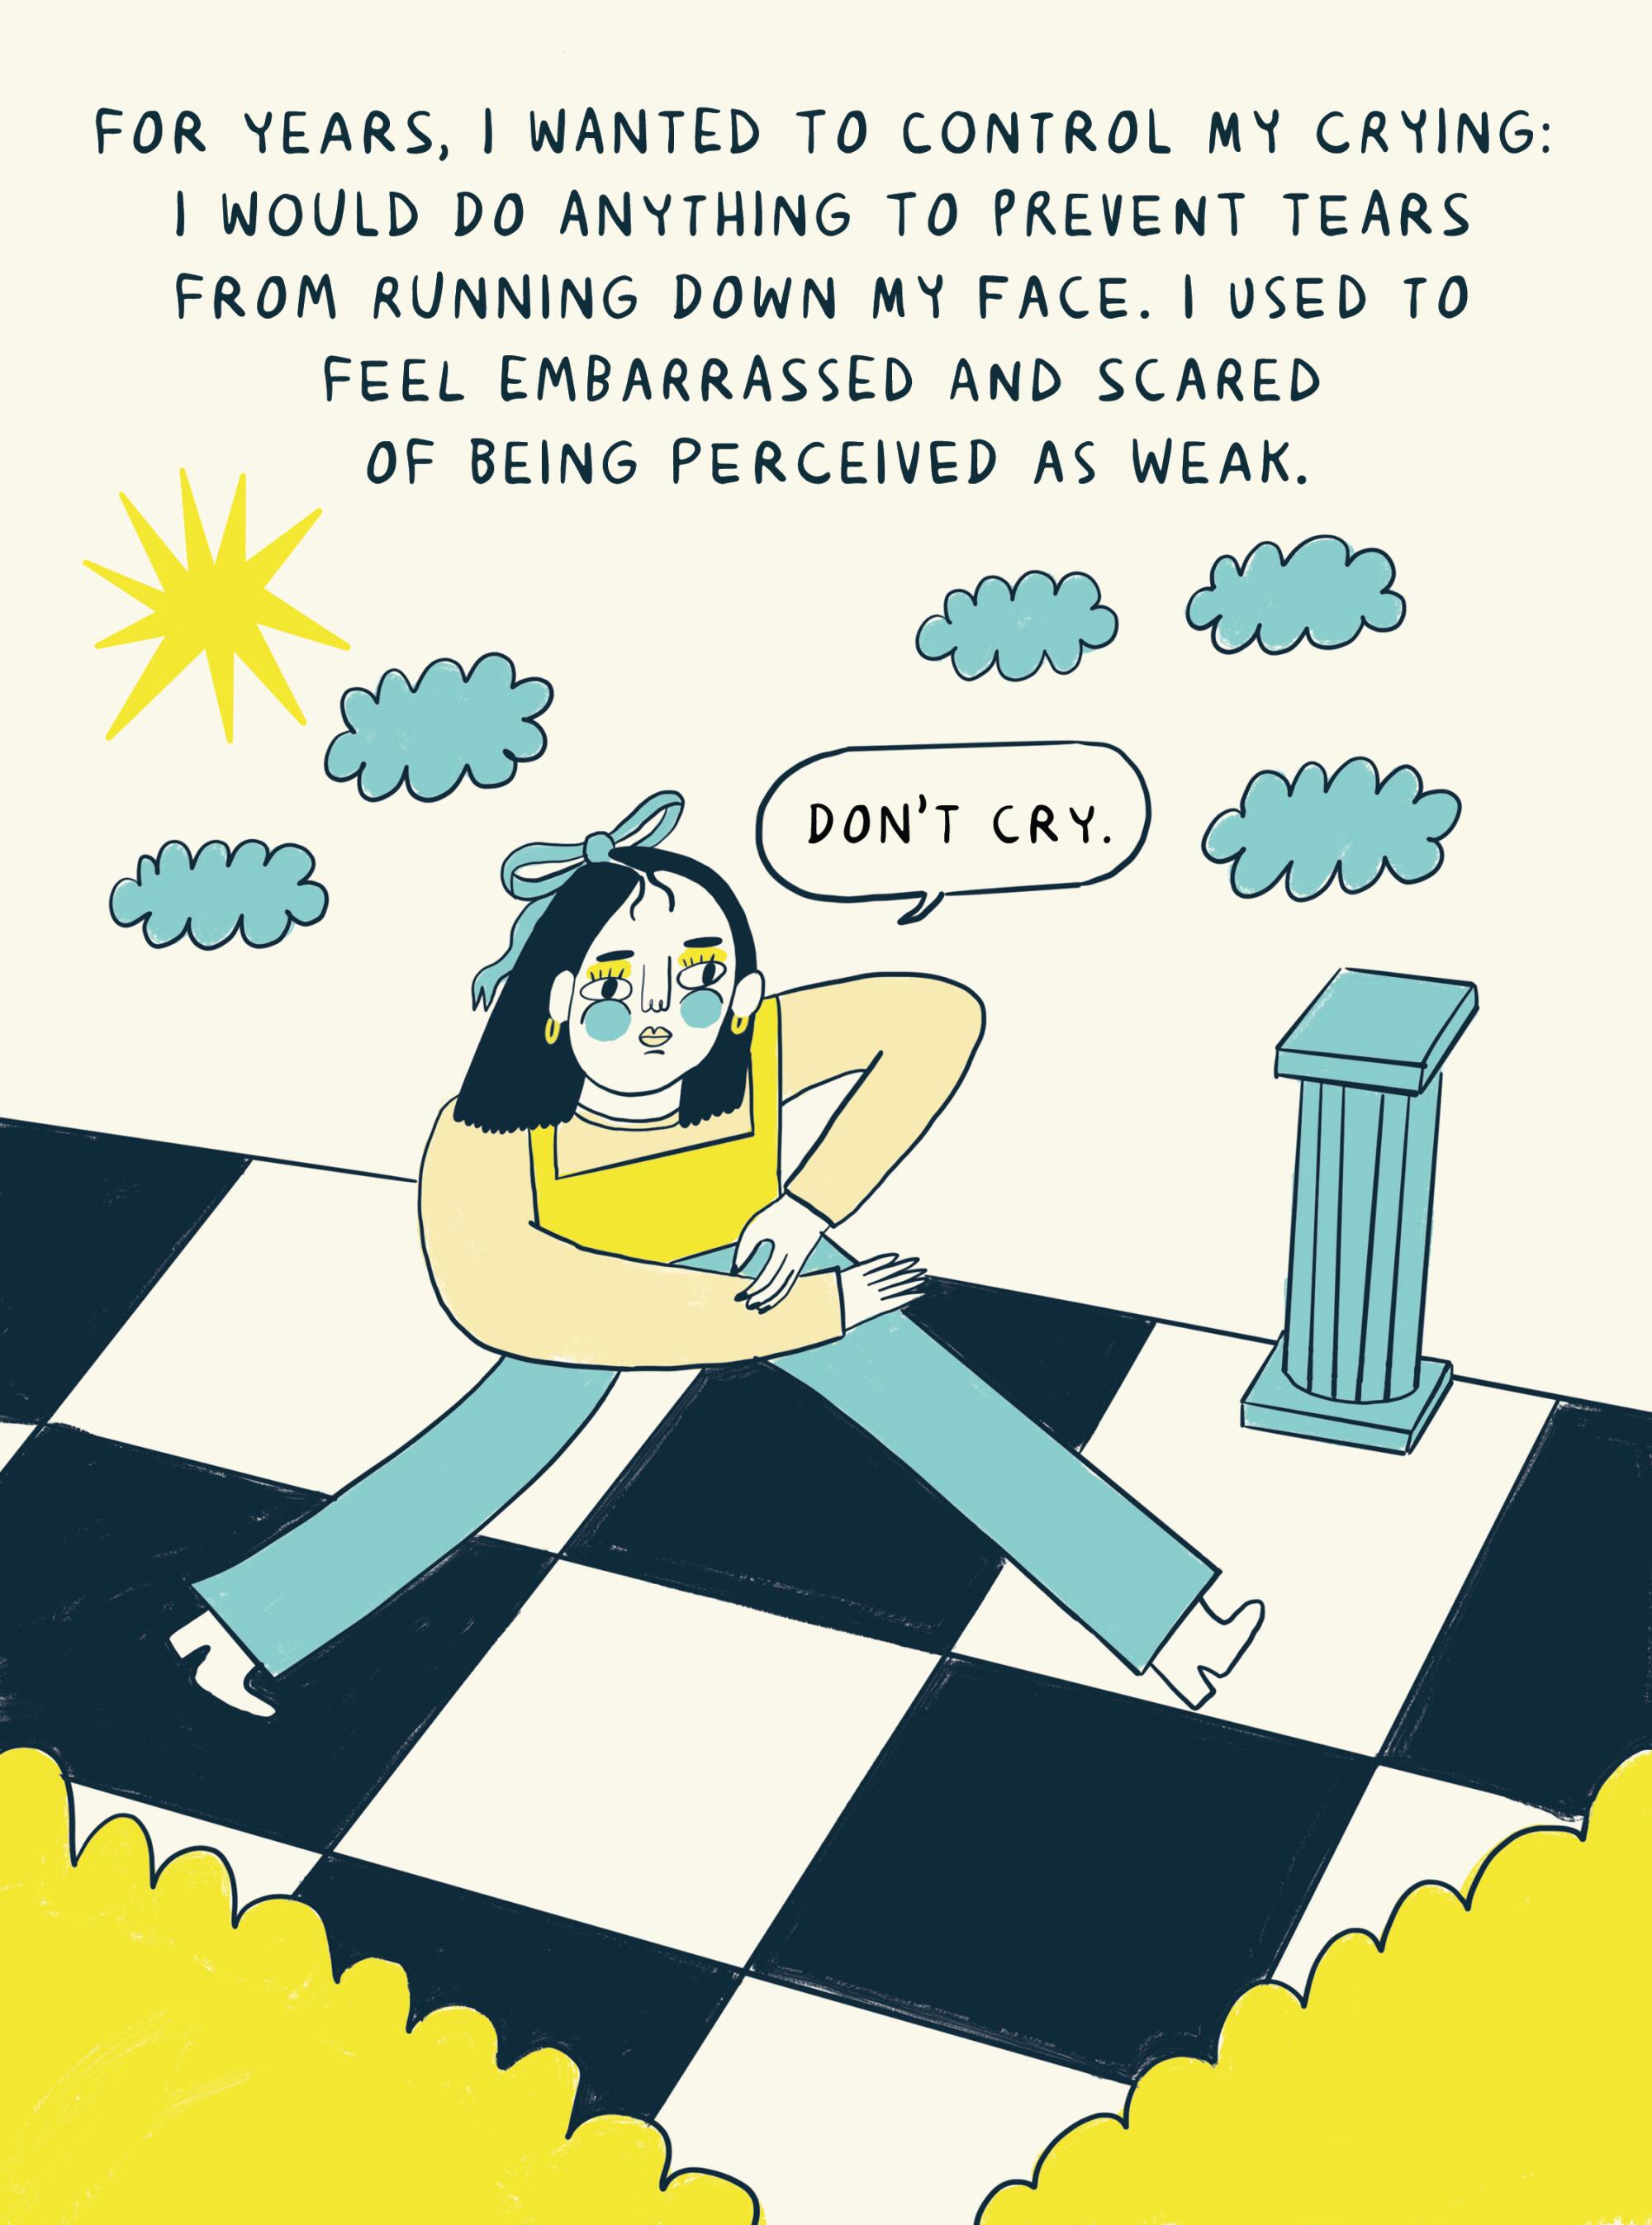 For years, I wanted to control my crying: I'd do anything to prevent tears running down my face. I used to feel embarrassed.